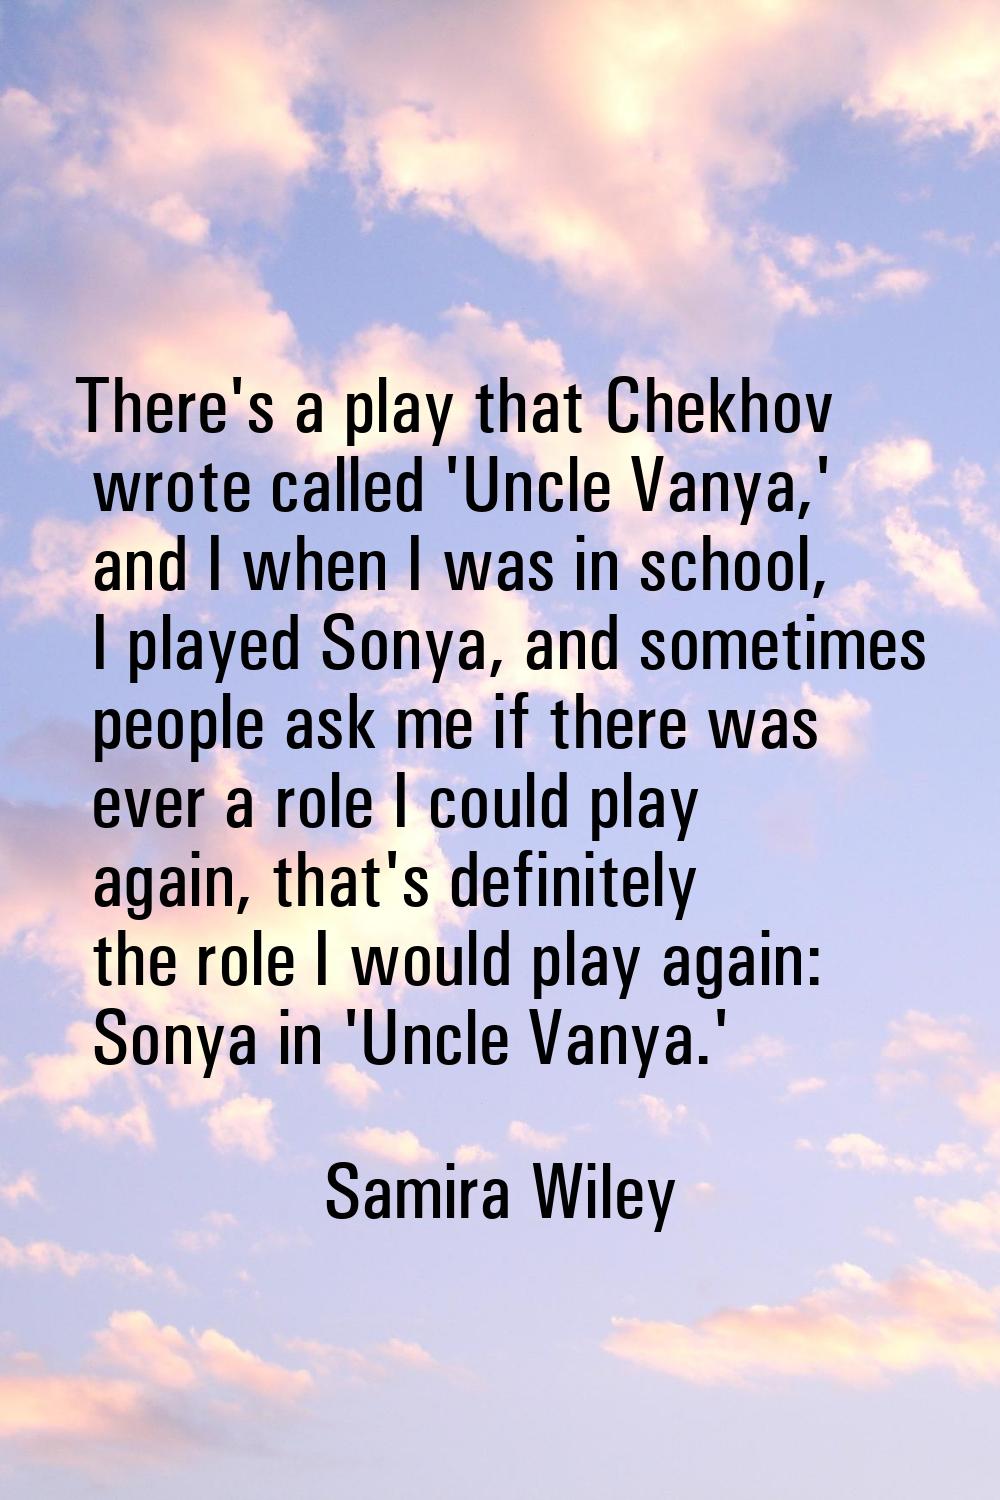 There's a play that Chekhov wrote called 'Uncle Vanya,' and I when I was in school, I played Sonya,